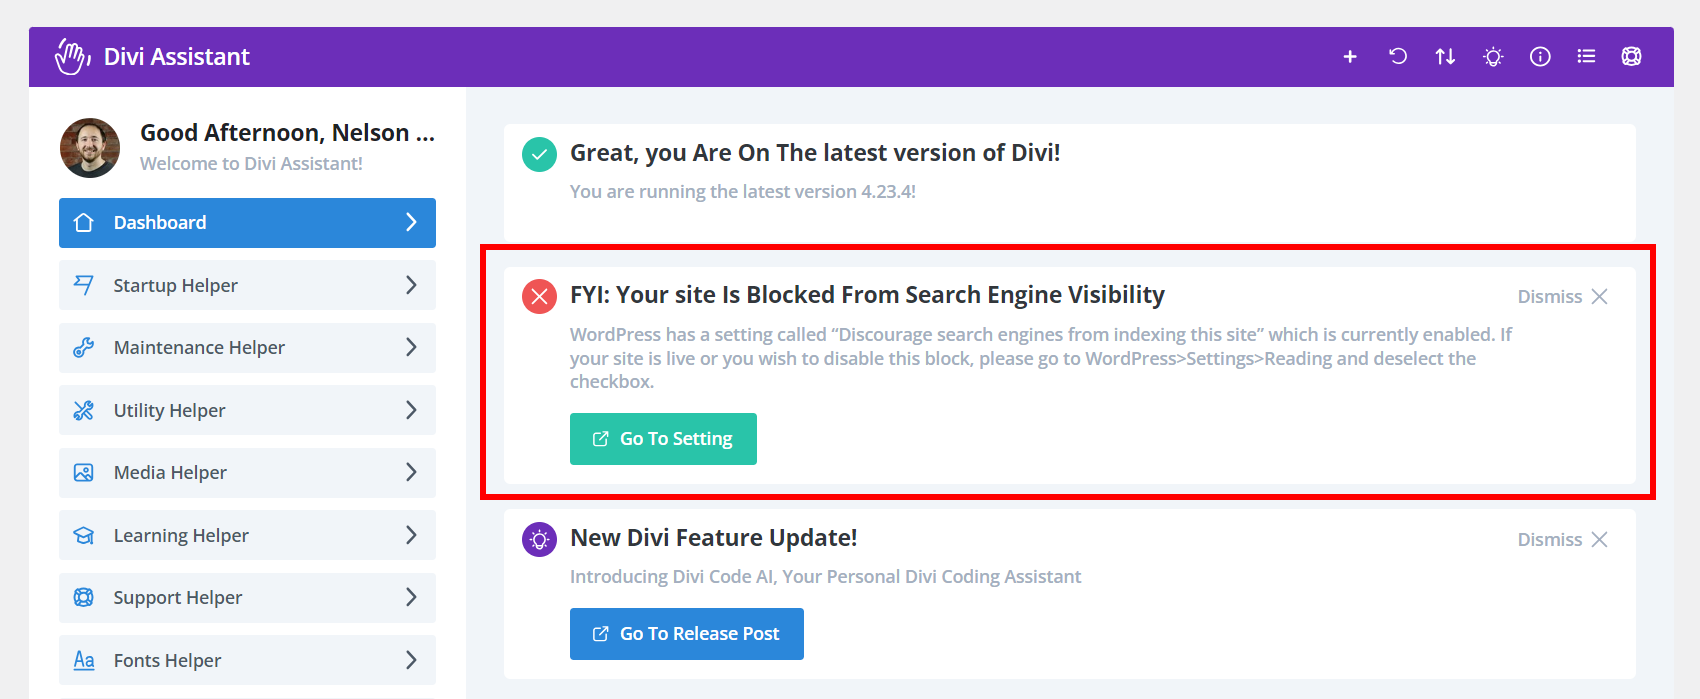 discourage search engines checkbox warning in Divi Assistant